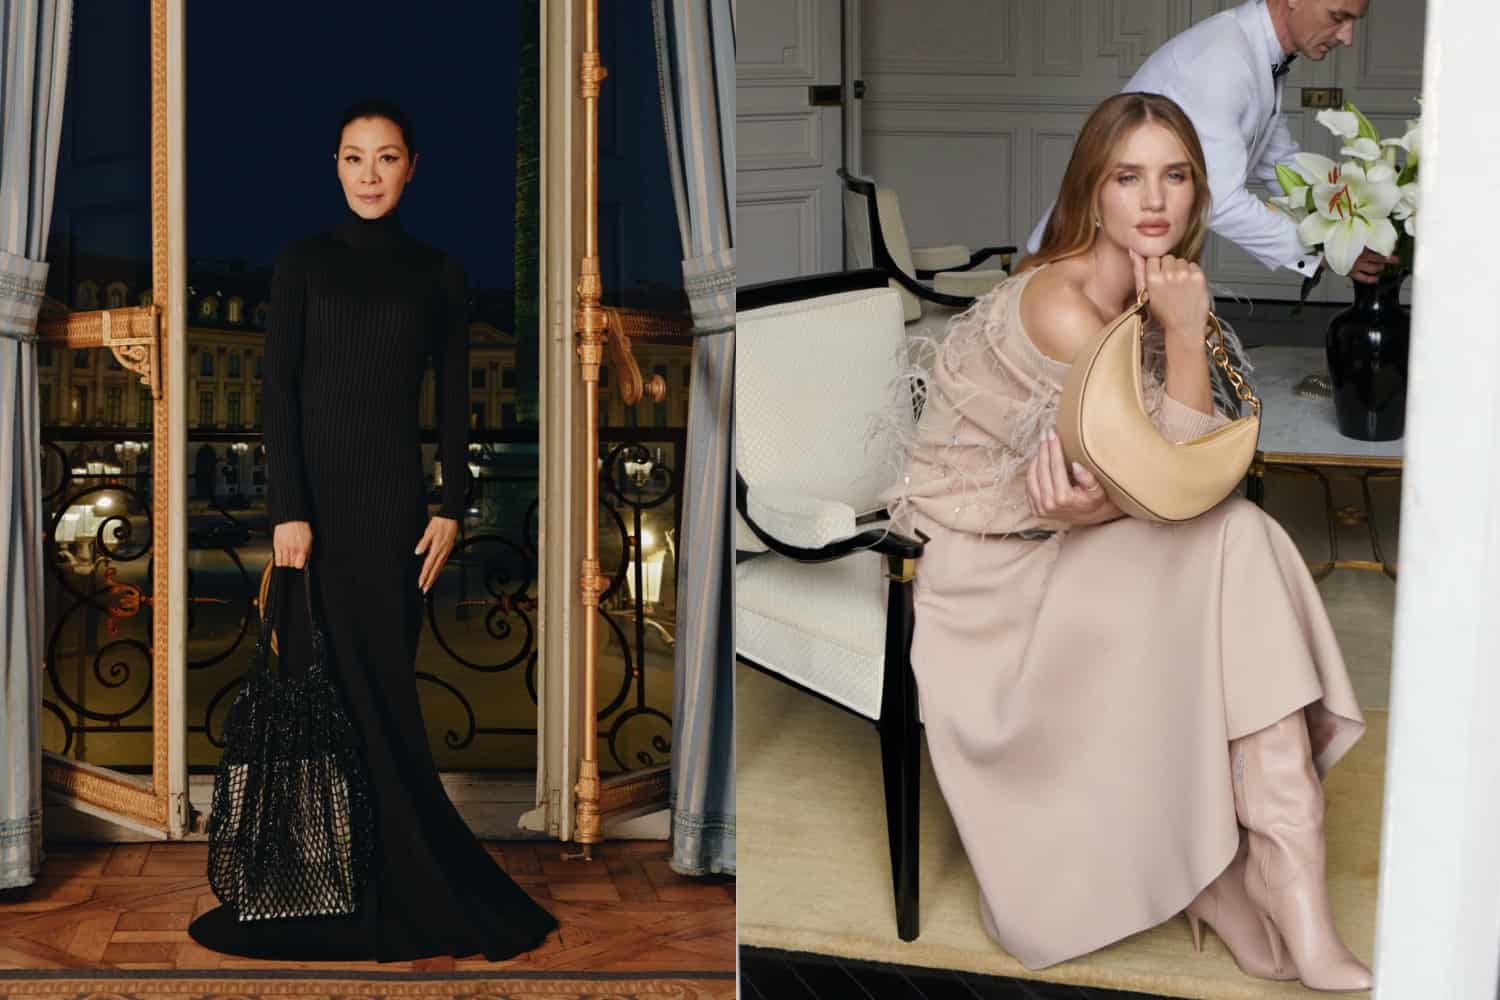 Jezebel Is Shuttering, Edward Enninful Signs With WME, Burberry Opens NYC Bar, Rosie Huntington Whiteley Fronts Valentino Campaign, Balenciaga’s New Face, And More!